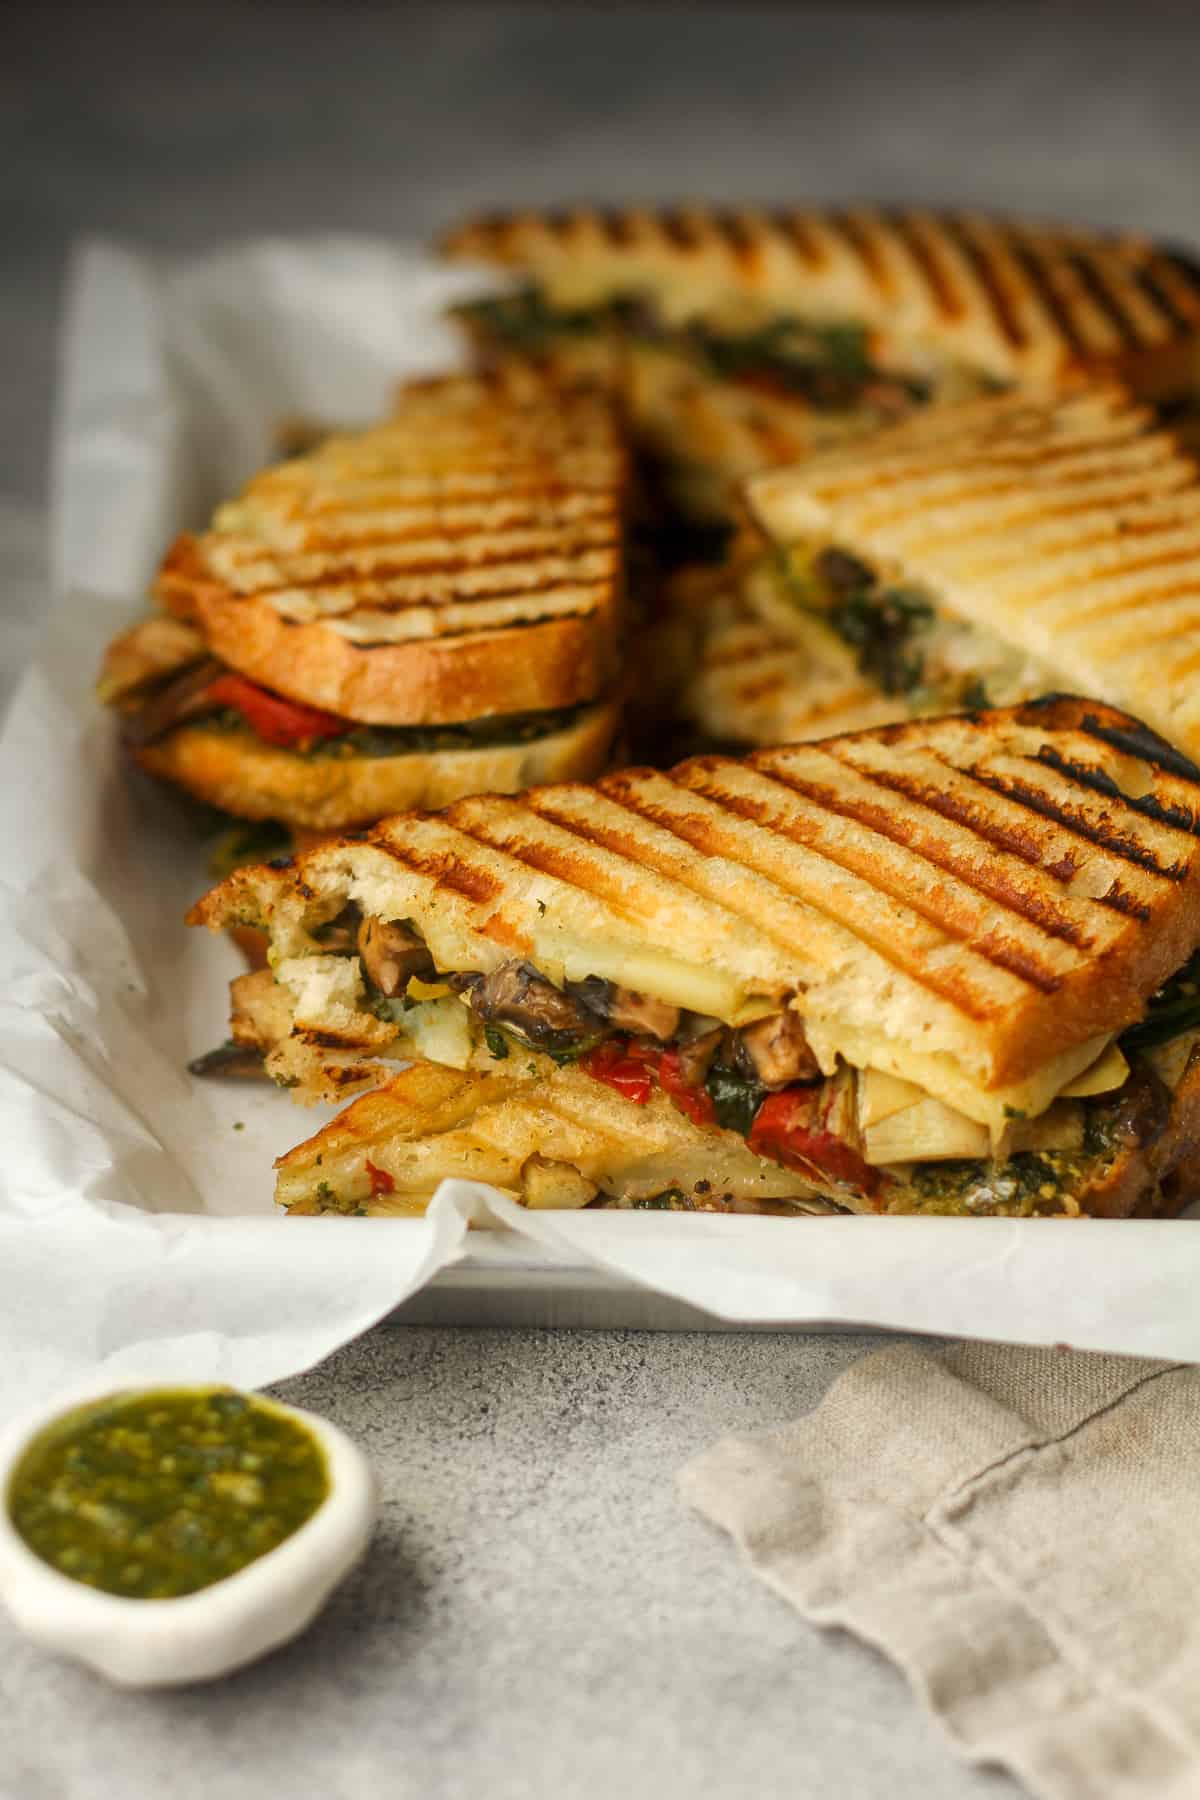 Side view of a tray of pesto sandwiches with veggies.